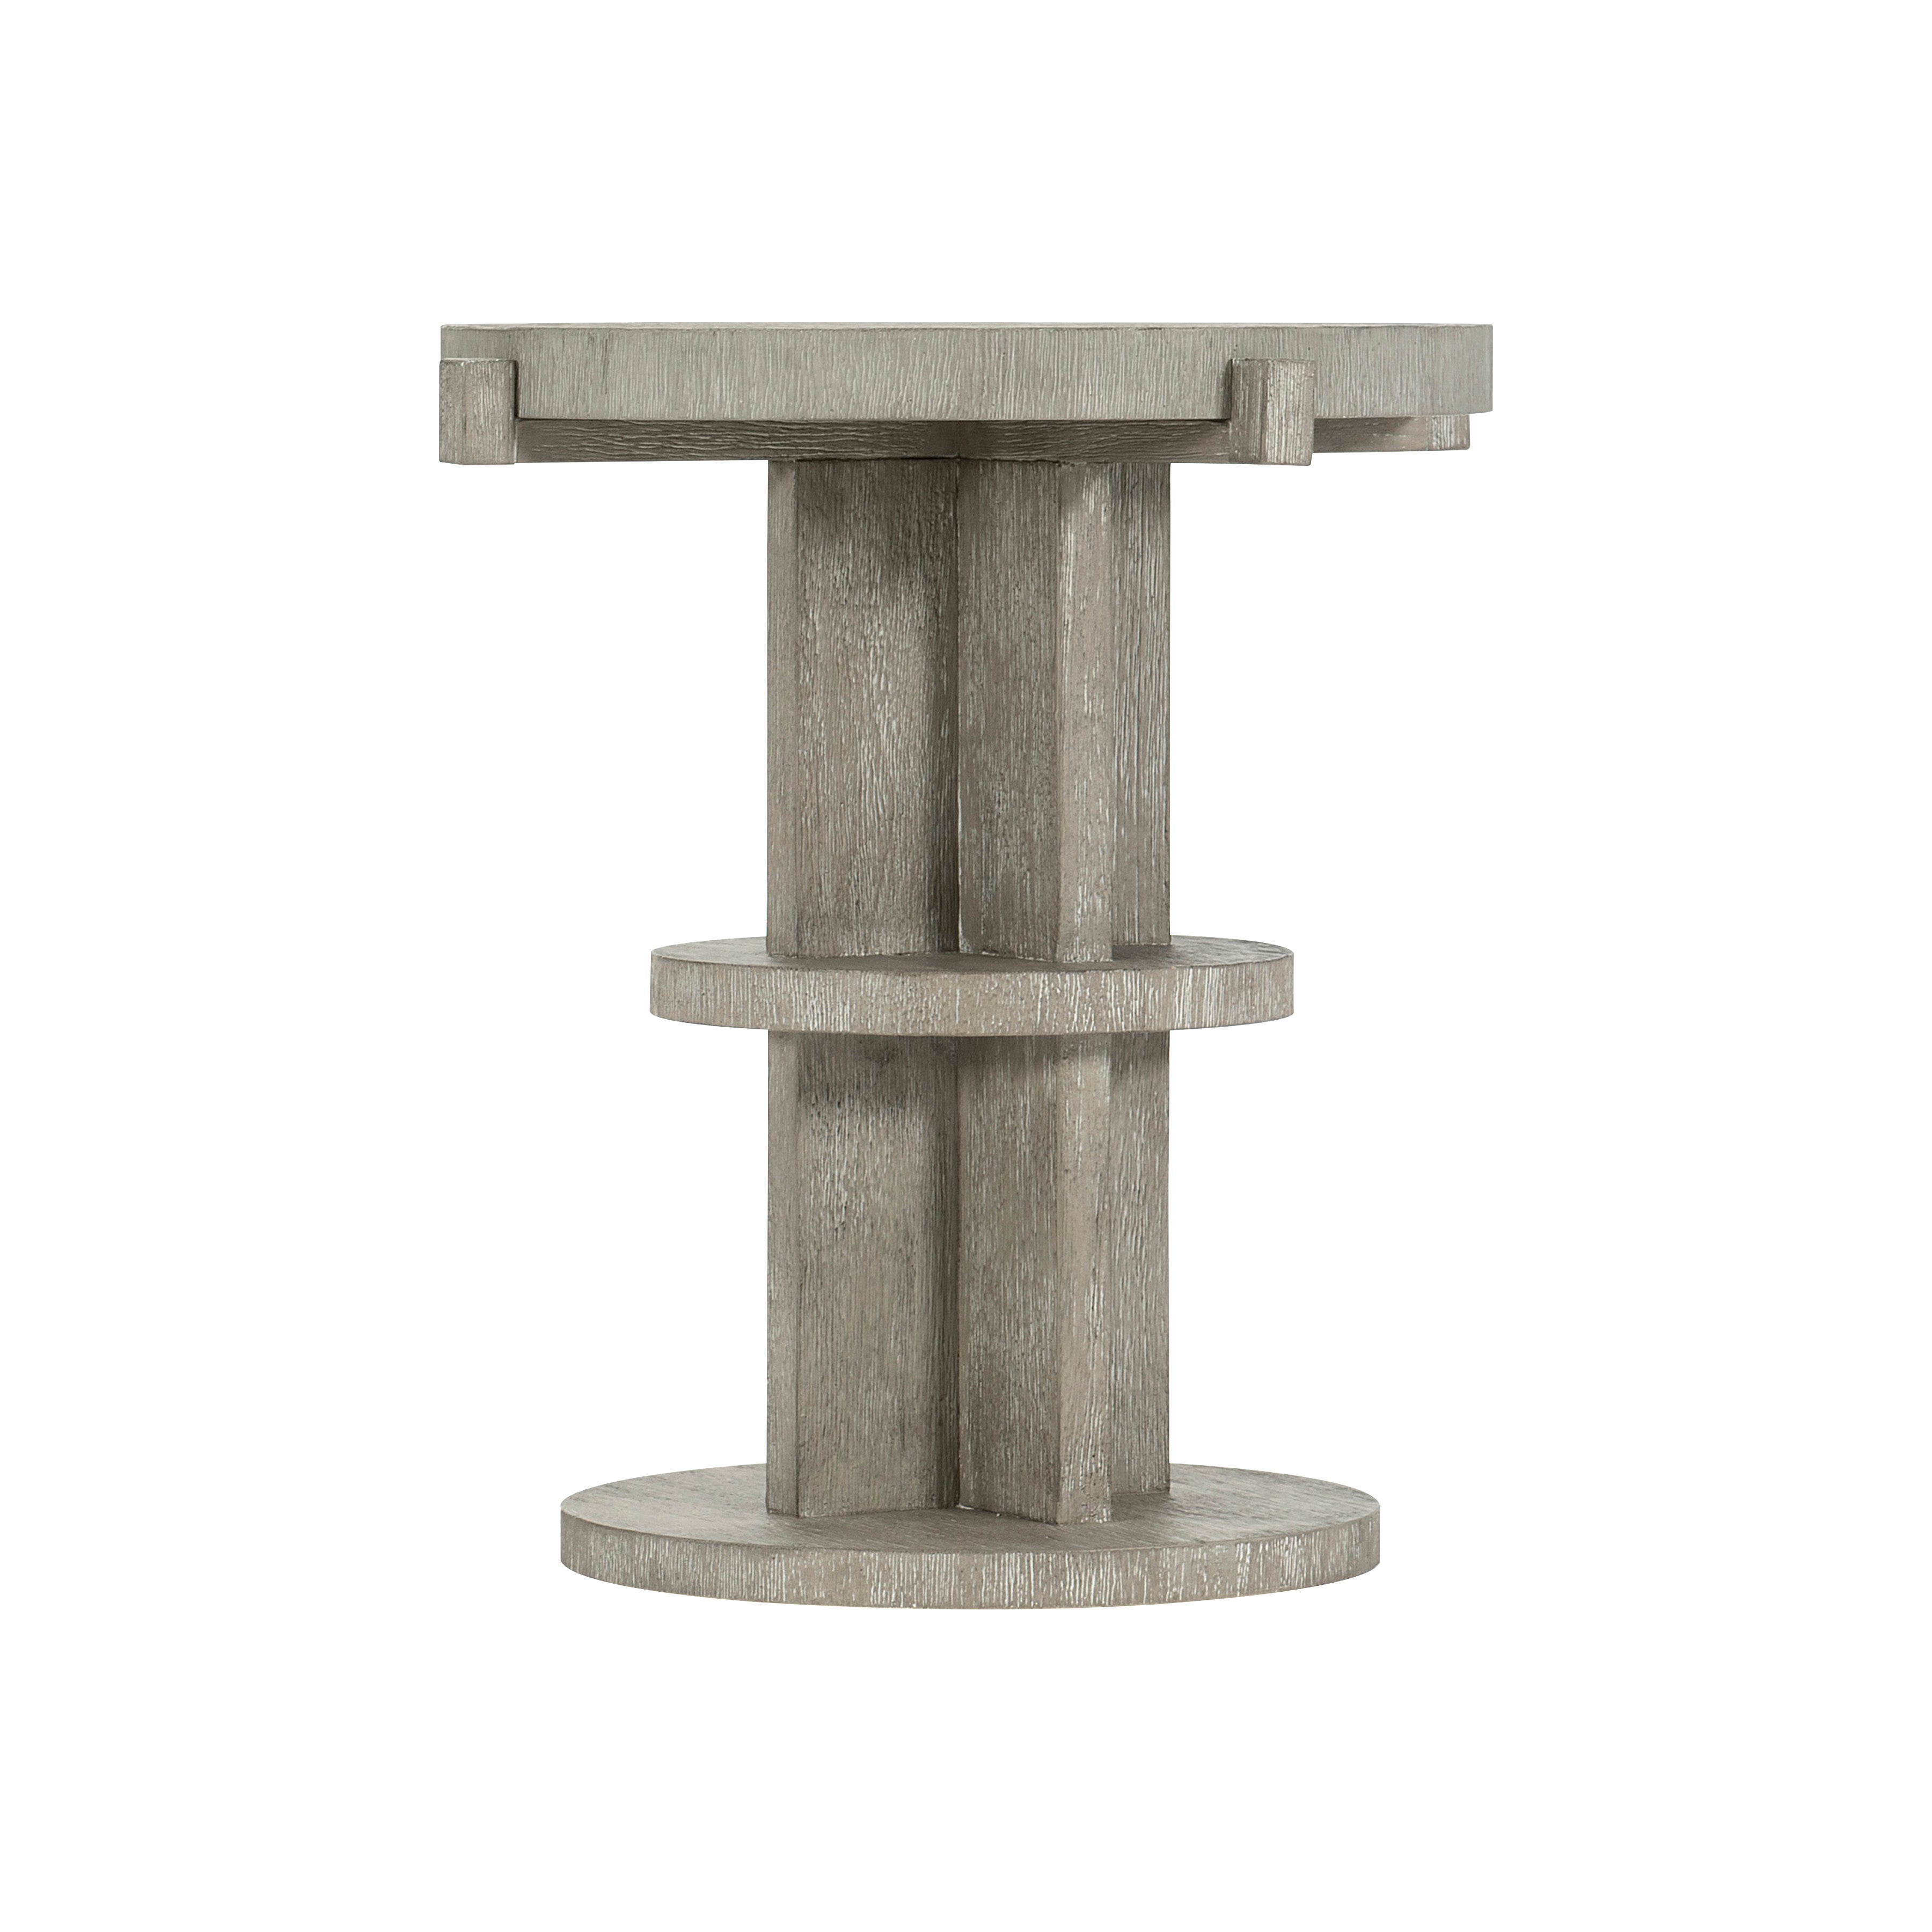 Foundations Round Side Table in Light Shale Finish